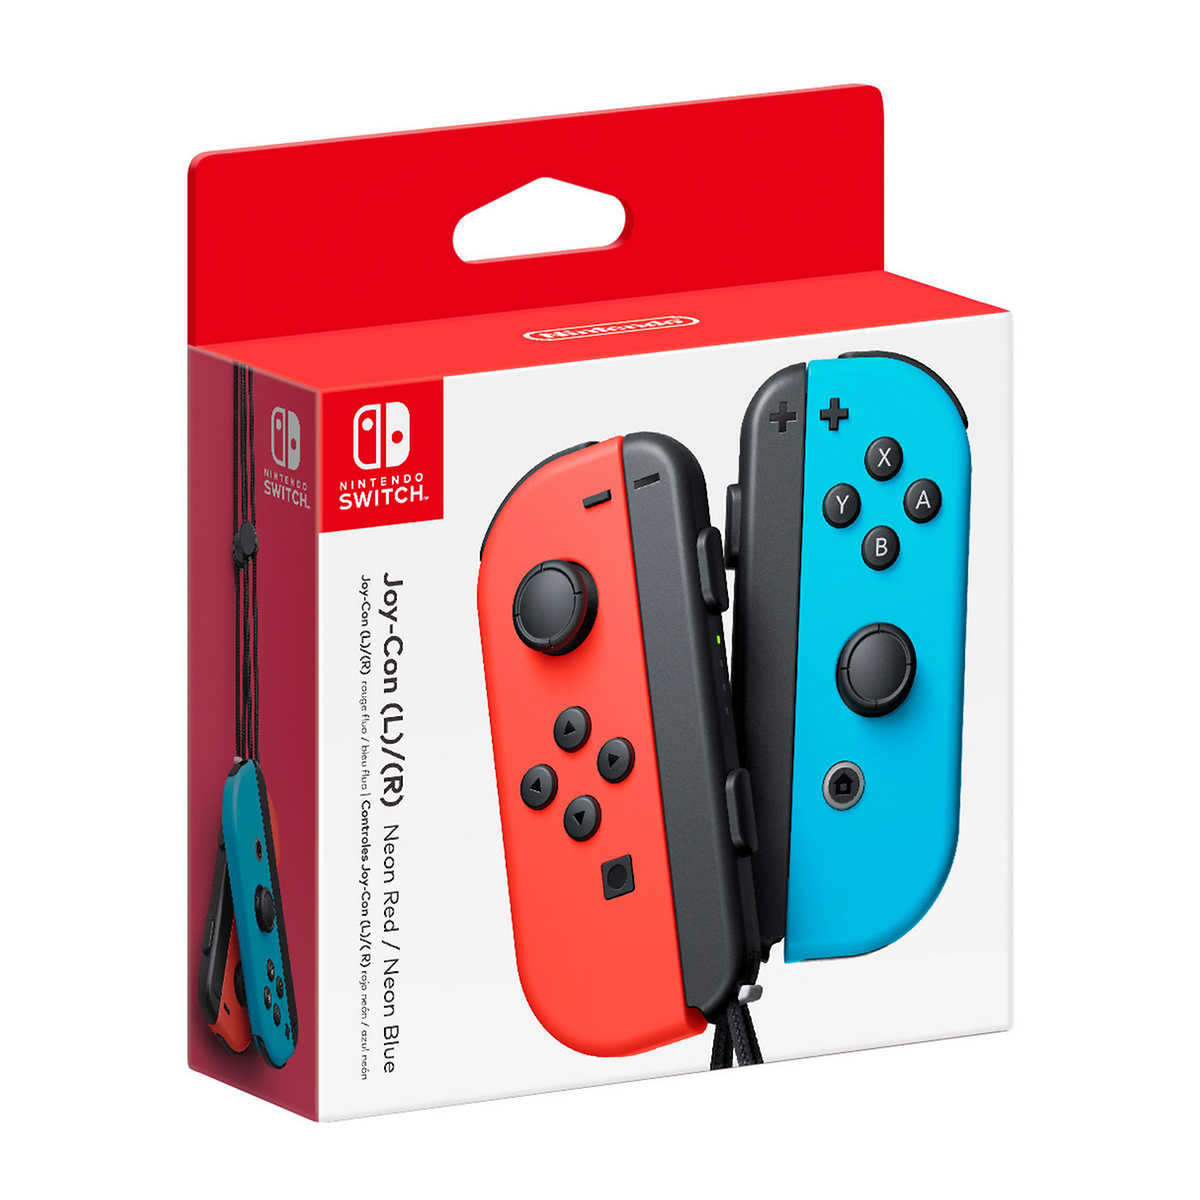 Costco Members: Nintendo Switch Joy-Cons (L/R, Red/Blue) for $50 in-store-only YMMV $49.97